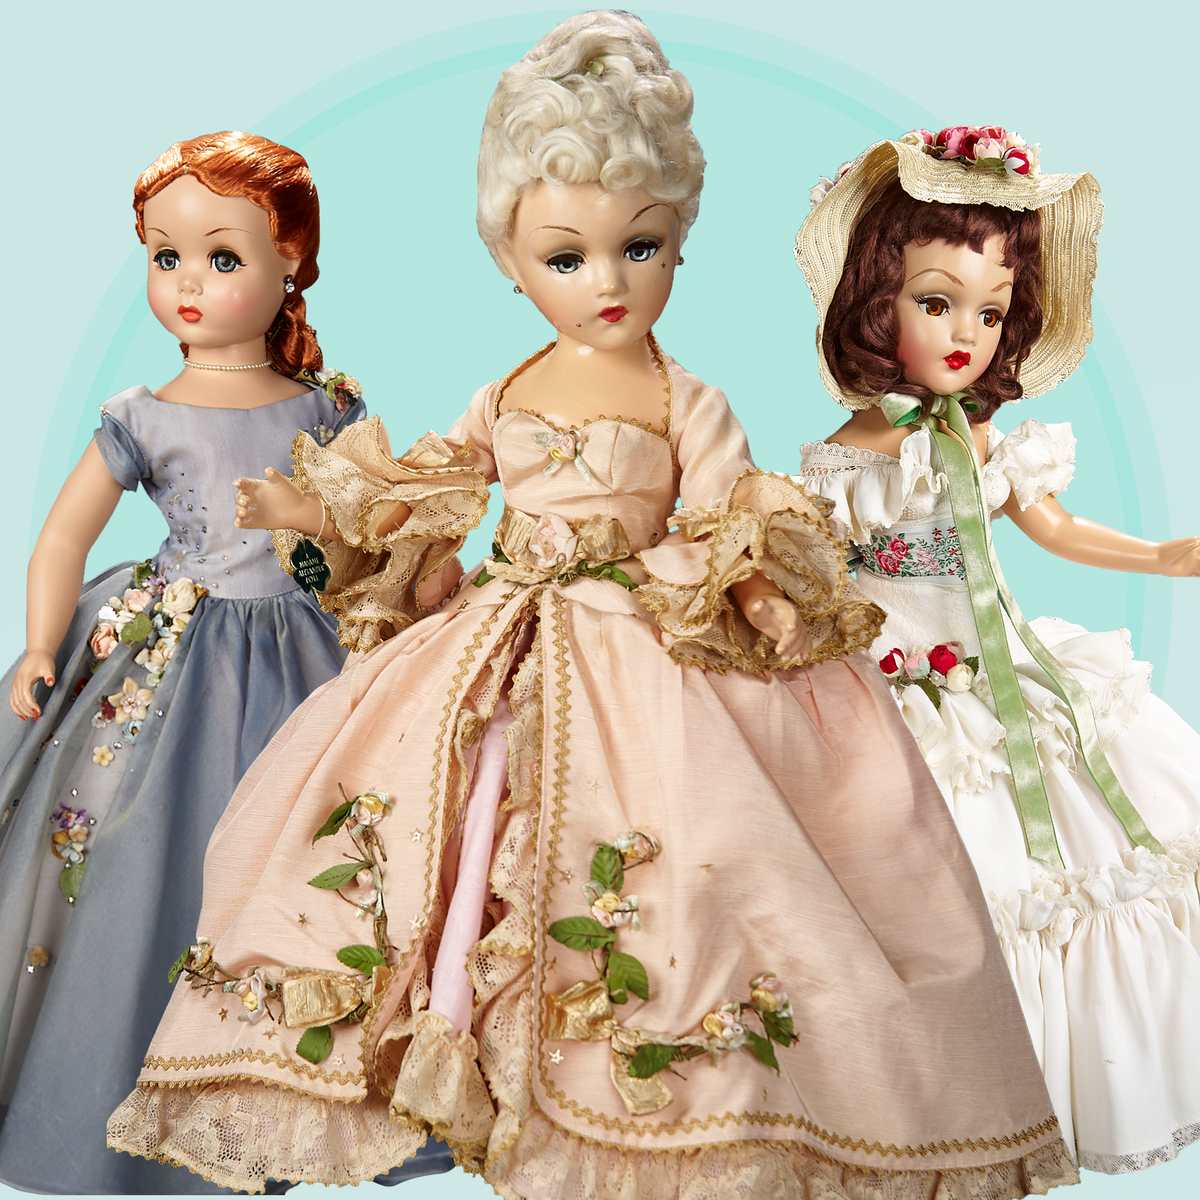 madame alexander dolls could be worth thousands